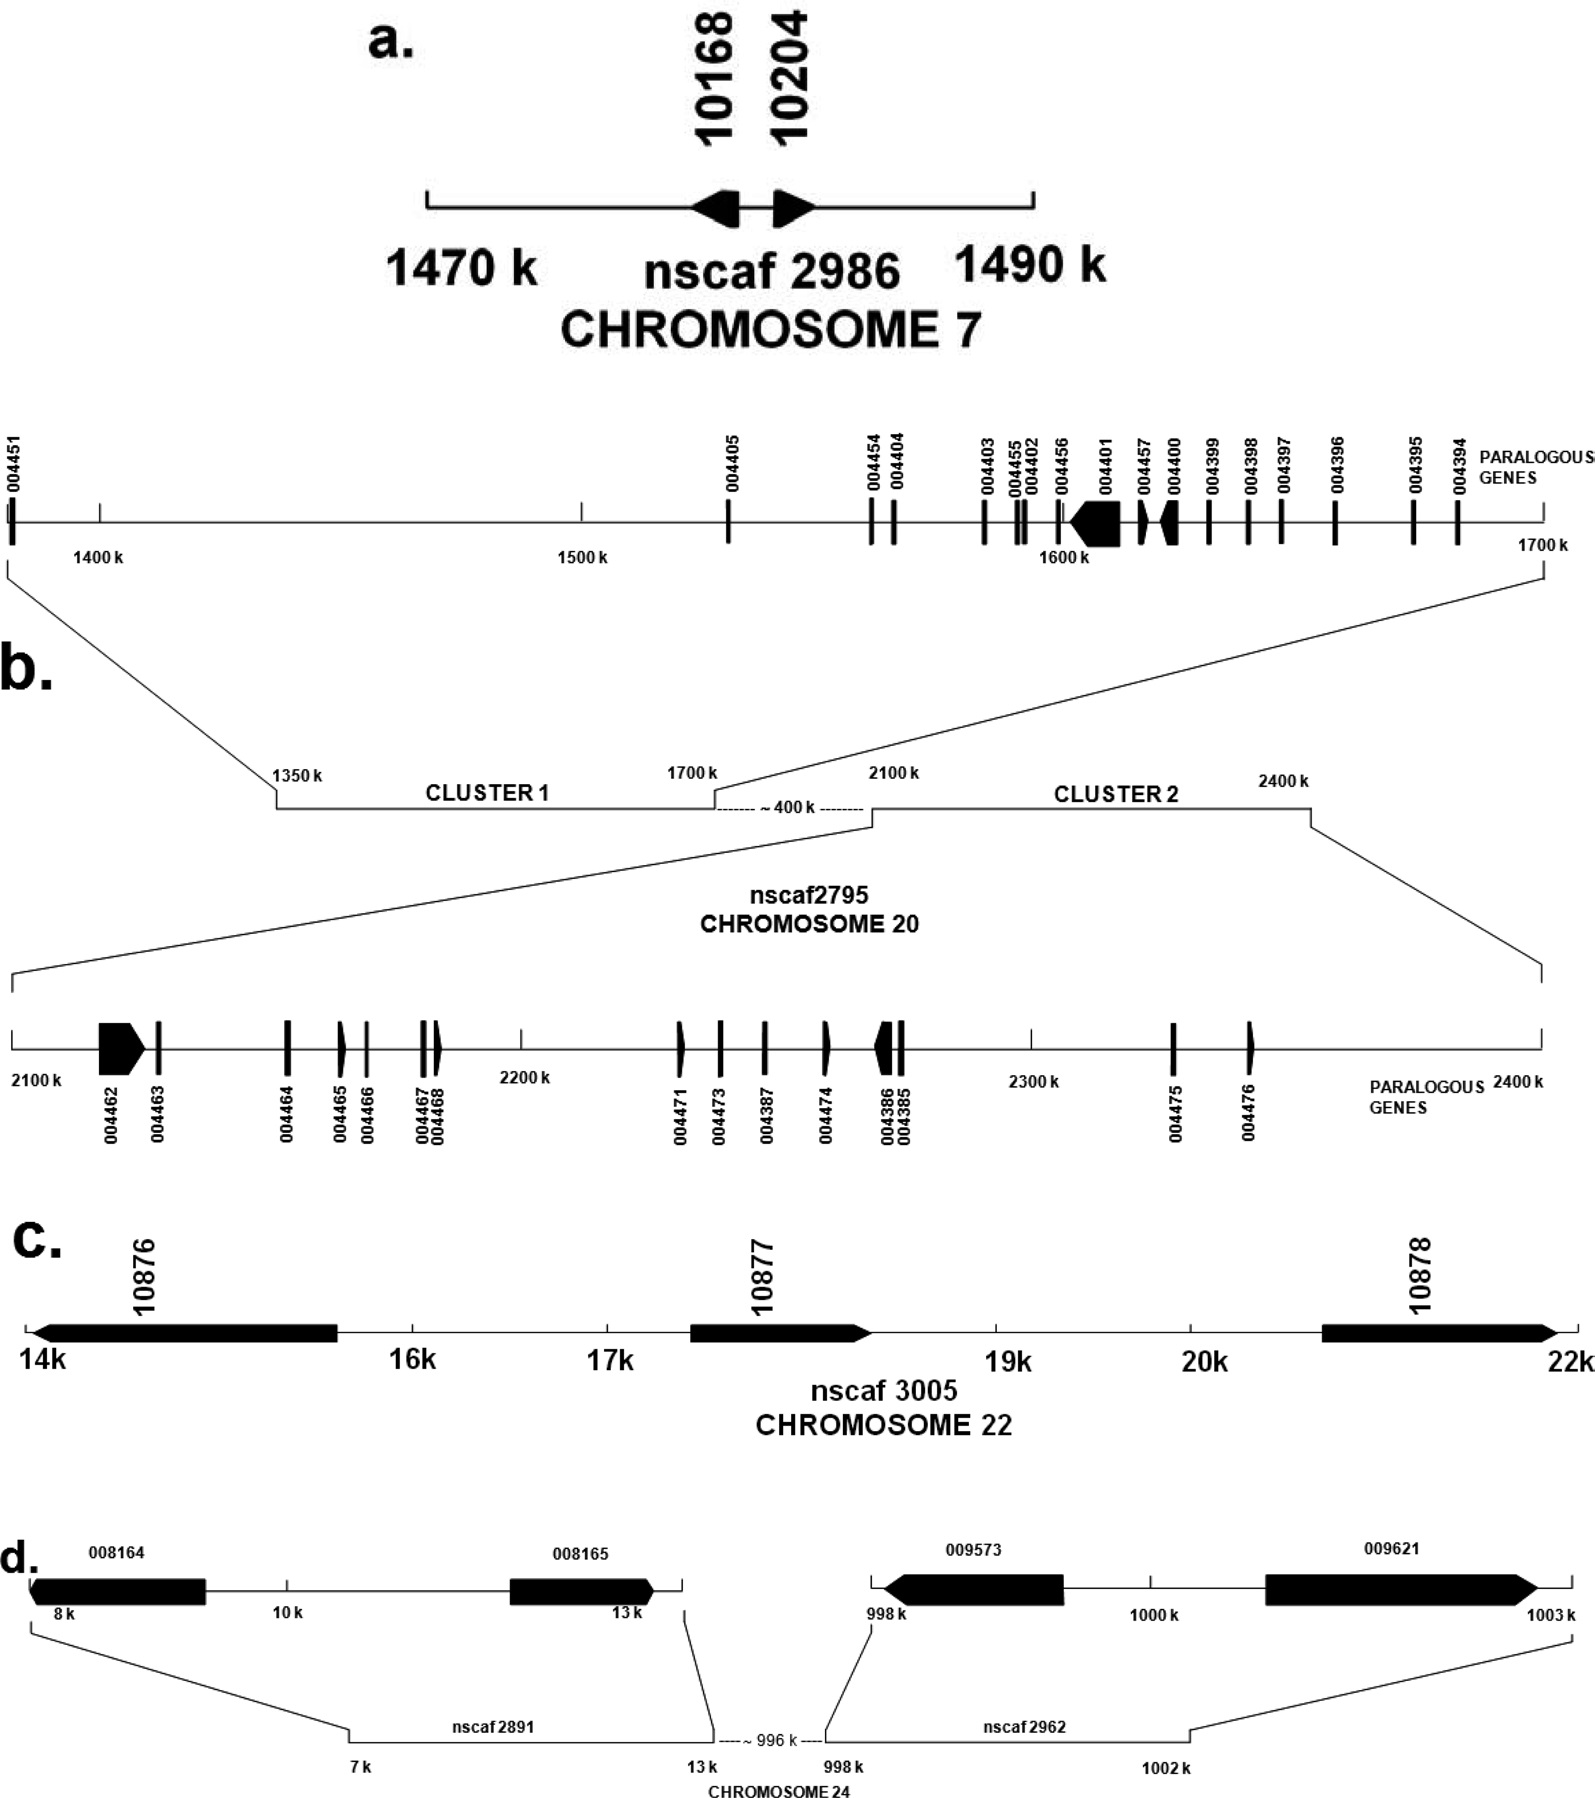 Schematic representation of gene clusters arranged on different chromosomes of B. mori. (a) The two paralogous genes of ENF-BP located in nscaf 2986 between 1470 kb and 1490 kb on chromosome 7. (b) The two major gene clusters of 30 KP and S/T rich 30 KP located in nscaf 2795. Cluster one flanked from 1350 kb to 1700kb and cluster two from 2100 kb to 2400 kb on chromosome 20 with intergenic region of 400 kb. (c) Three paralogous genes of ENF-BP gene located in nscaf 3005 between 14000 kb to 22000 kb on chromosome 22. (d) Two clusters of ENF-BP gene located in nscaf 2891 and nscaf 2962. Cluster one flanked from 1350 kb to 1700 kb and cluster two from 2100 kb to 2400 kb on chromosome 24 with intergenic region of 996 kb.